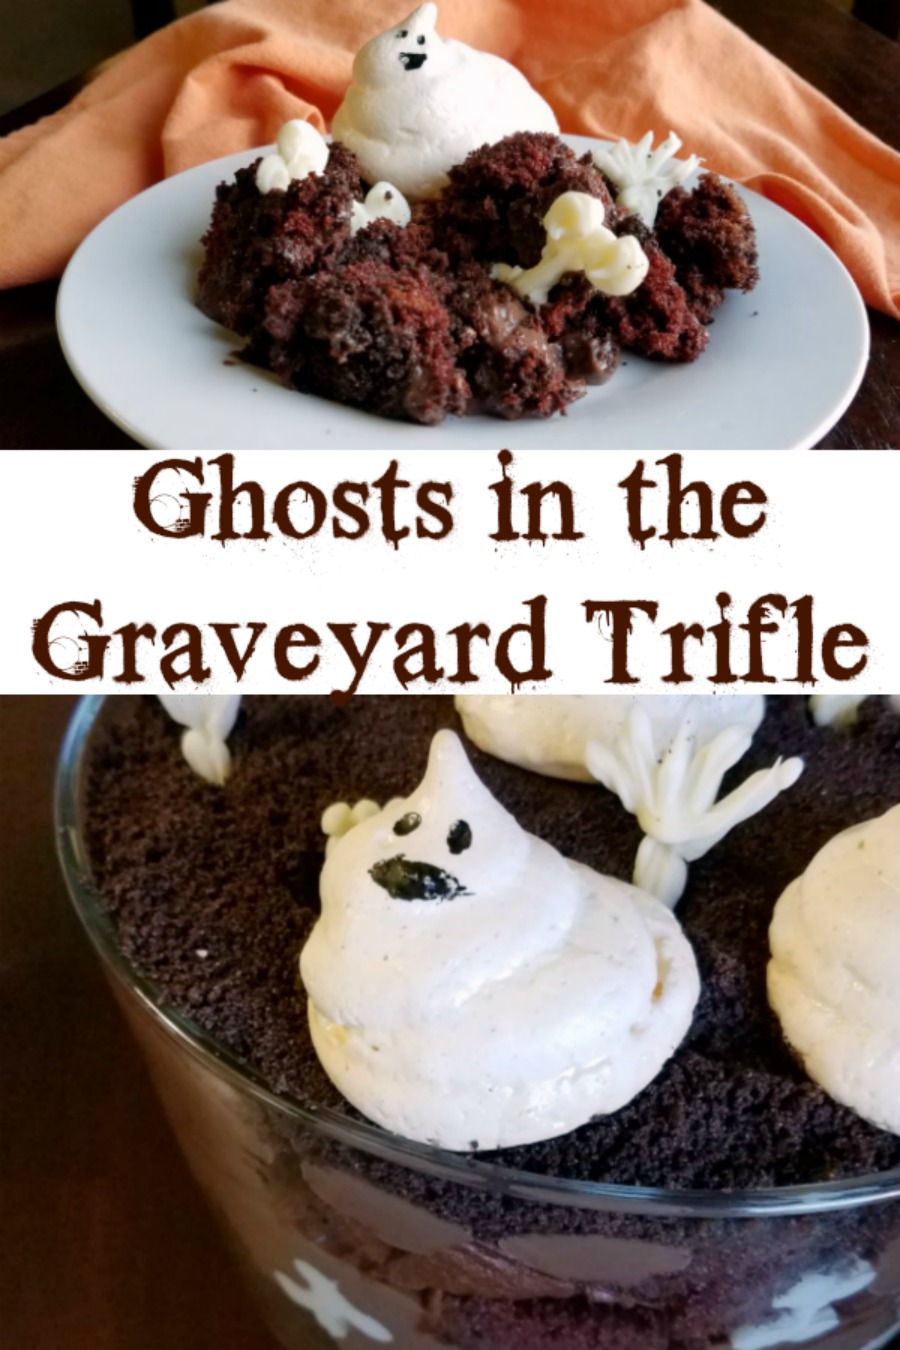 So sweet and so spooooooky! This trifle is full of chocolate goodness with sweet meringue ghosts and white chocolate bones. It's a great Halloween treat!